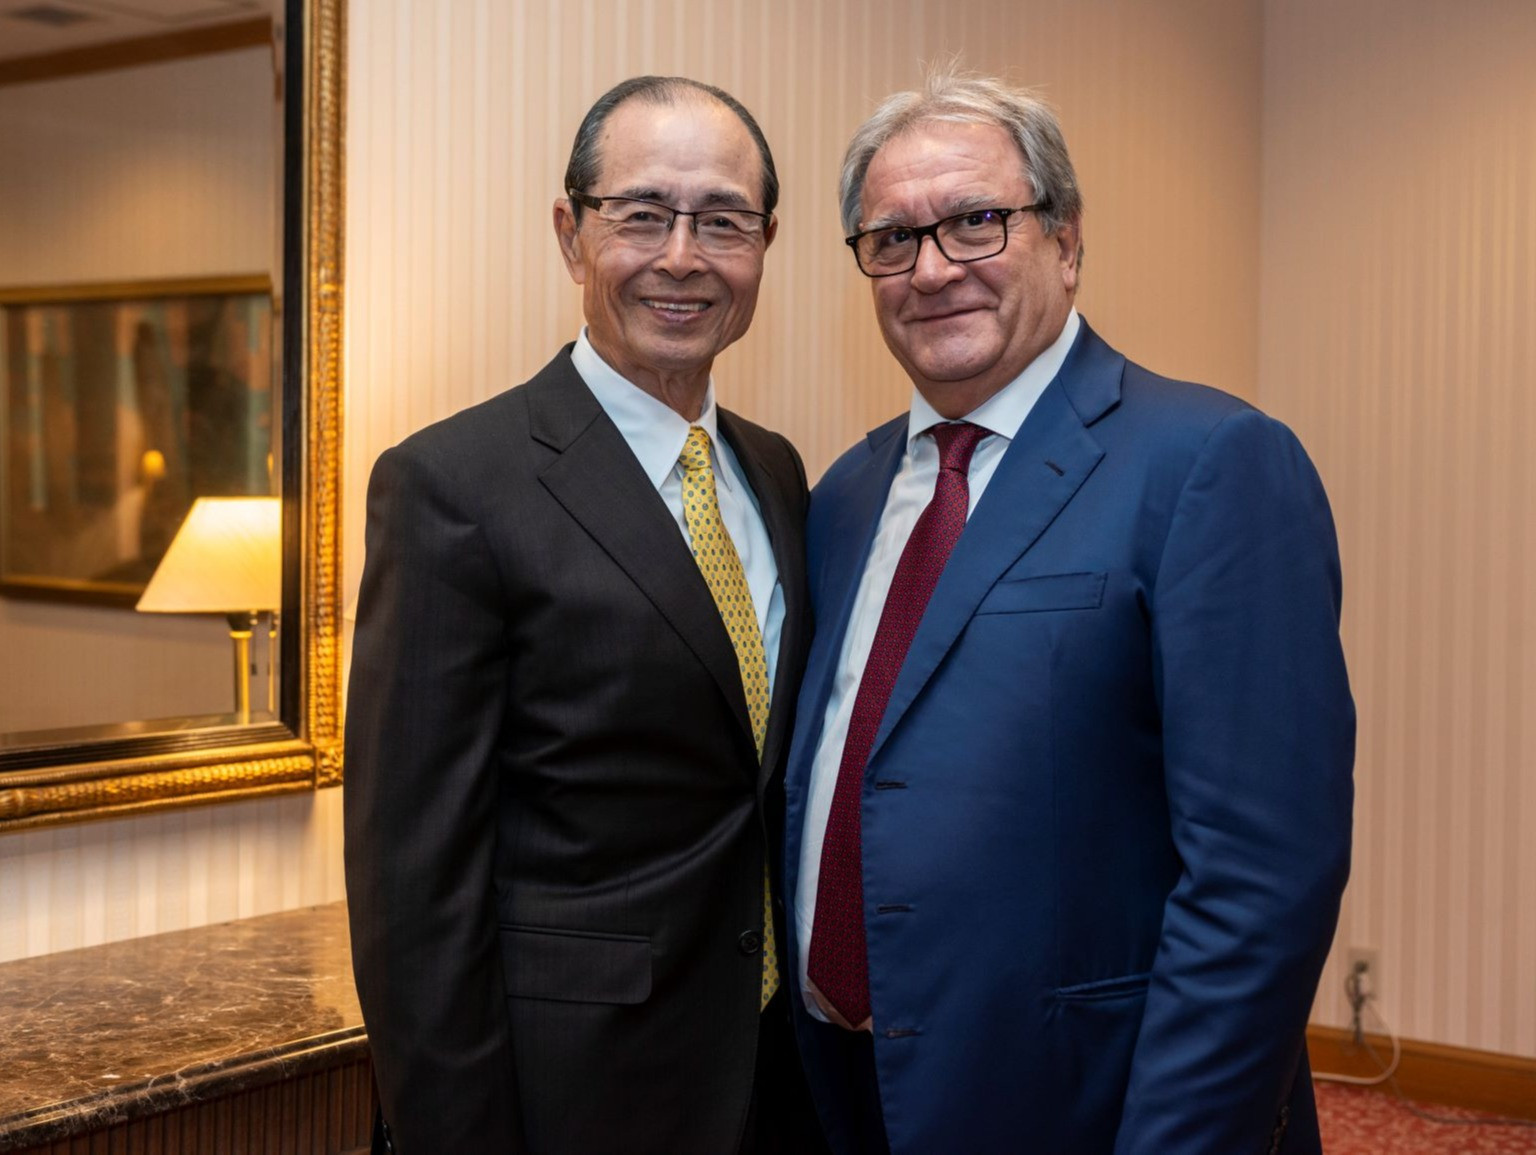 Japanese baseball legend Sadaharu Oh, pictured here with WBSC President Riccardo Fraccari, is looking forward to a big year for baseball and softball ©WBSC